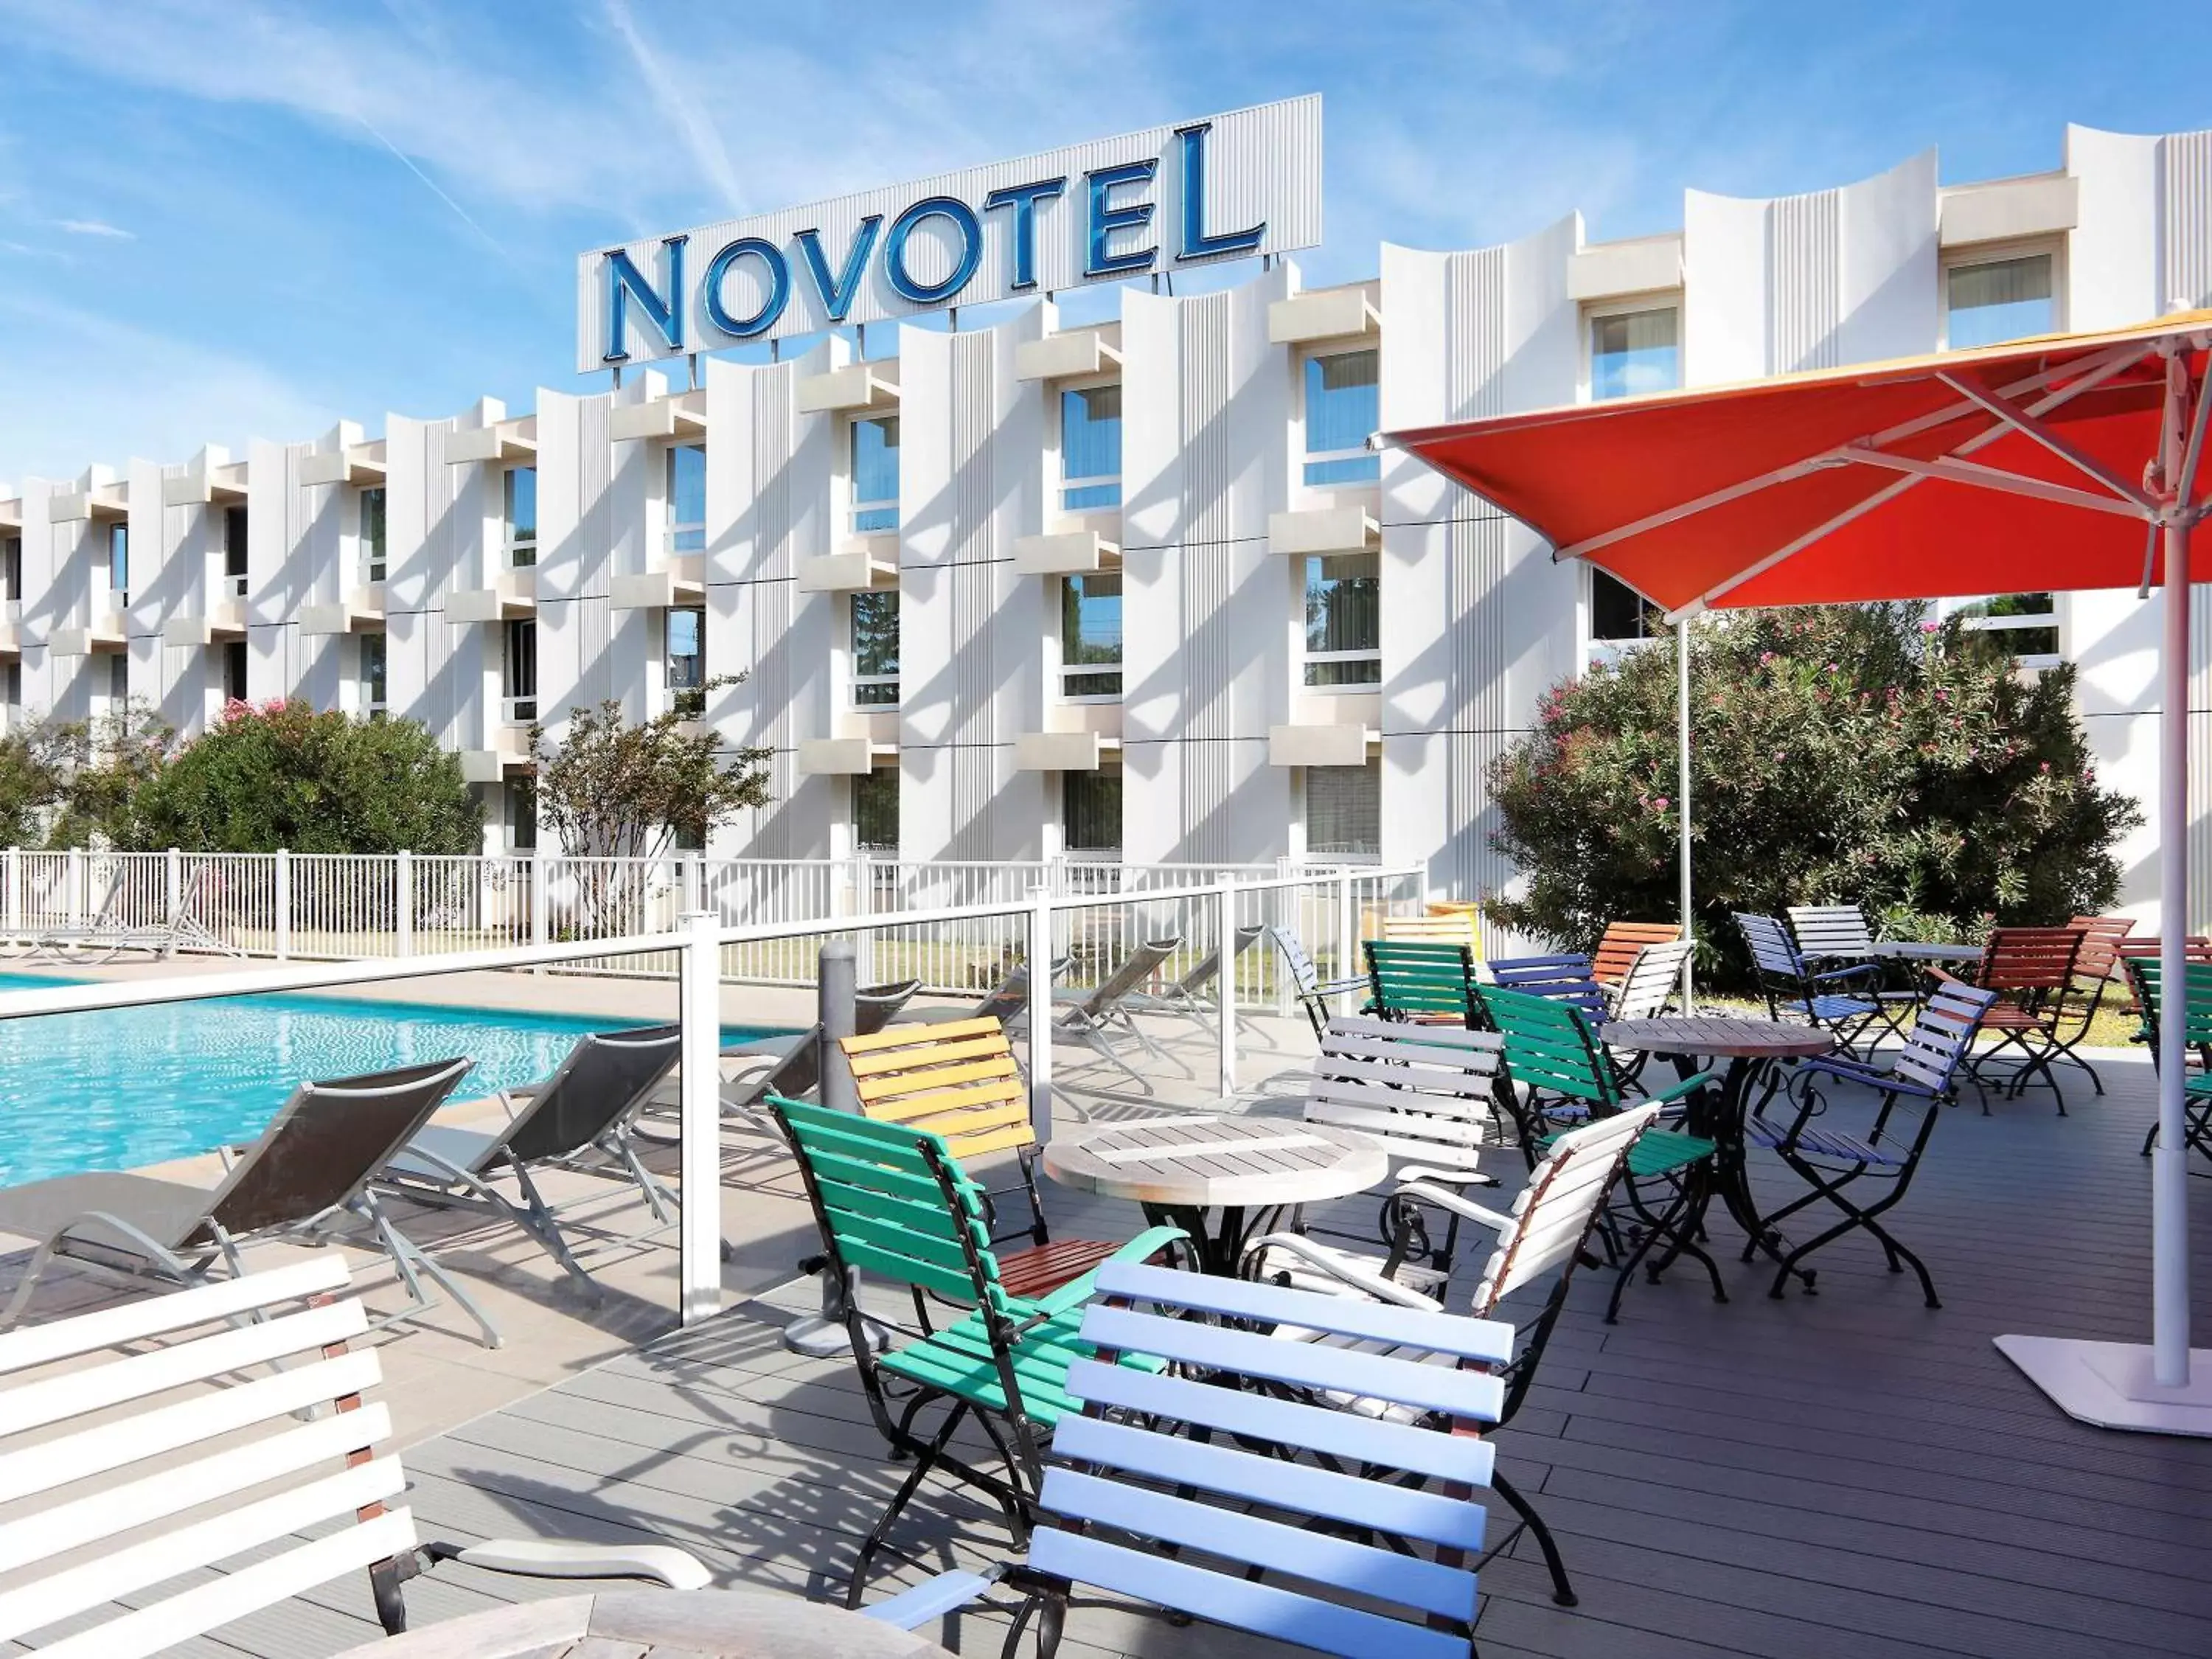 On site, Swimming Pool in Novotel Narbonne Sud A9/A61